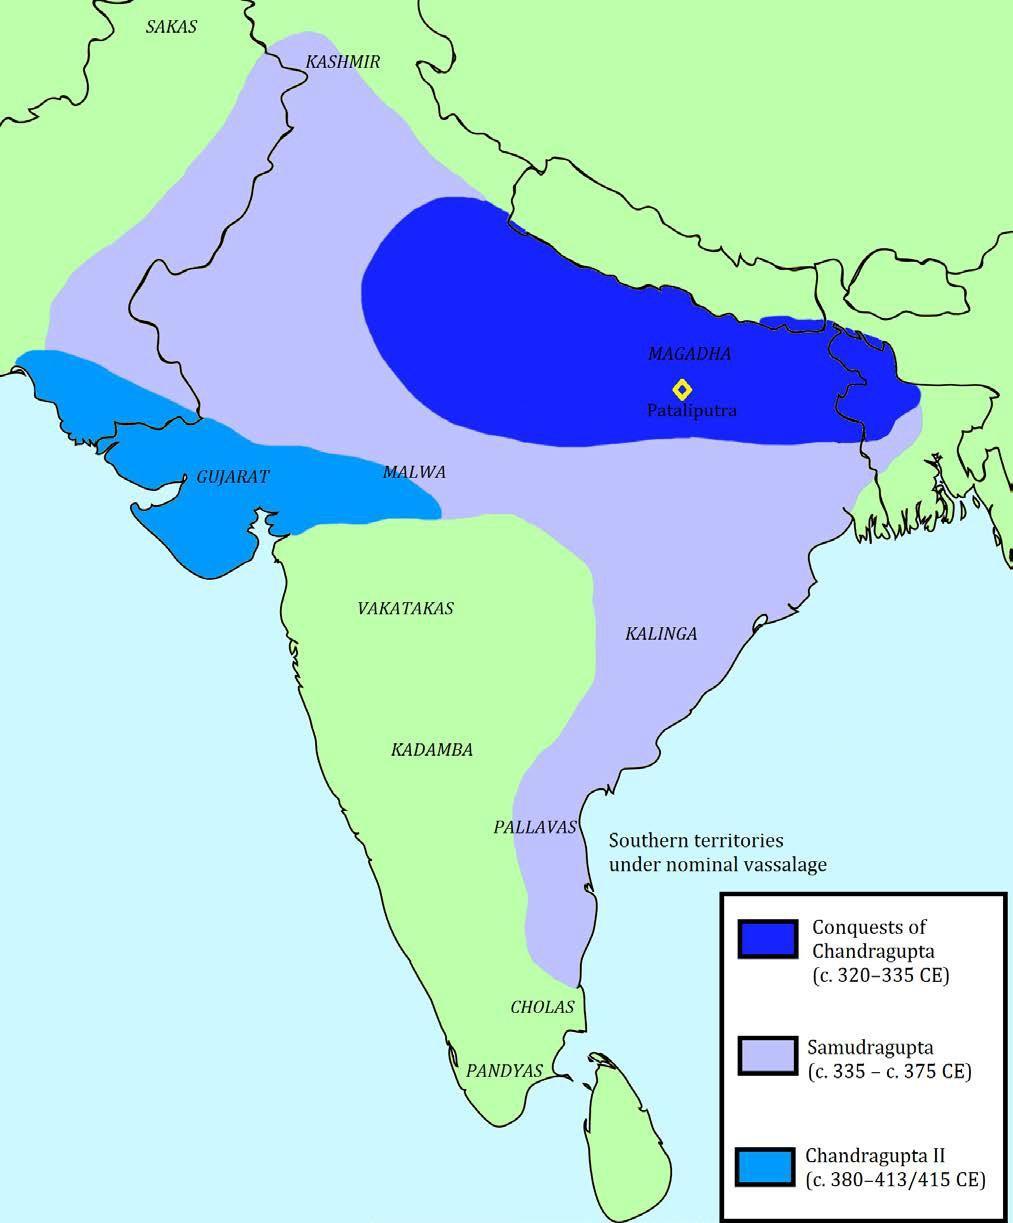 Map of The Gupta Empire in the third and fourth centuries CE